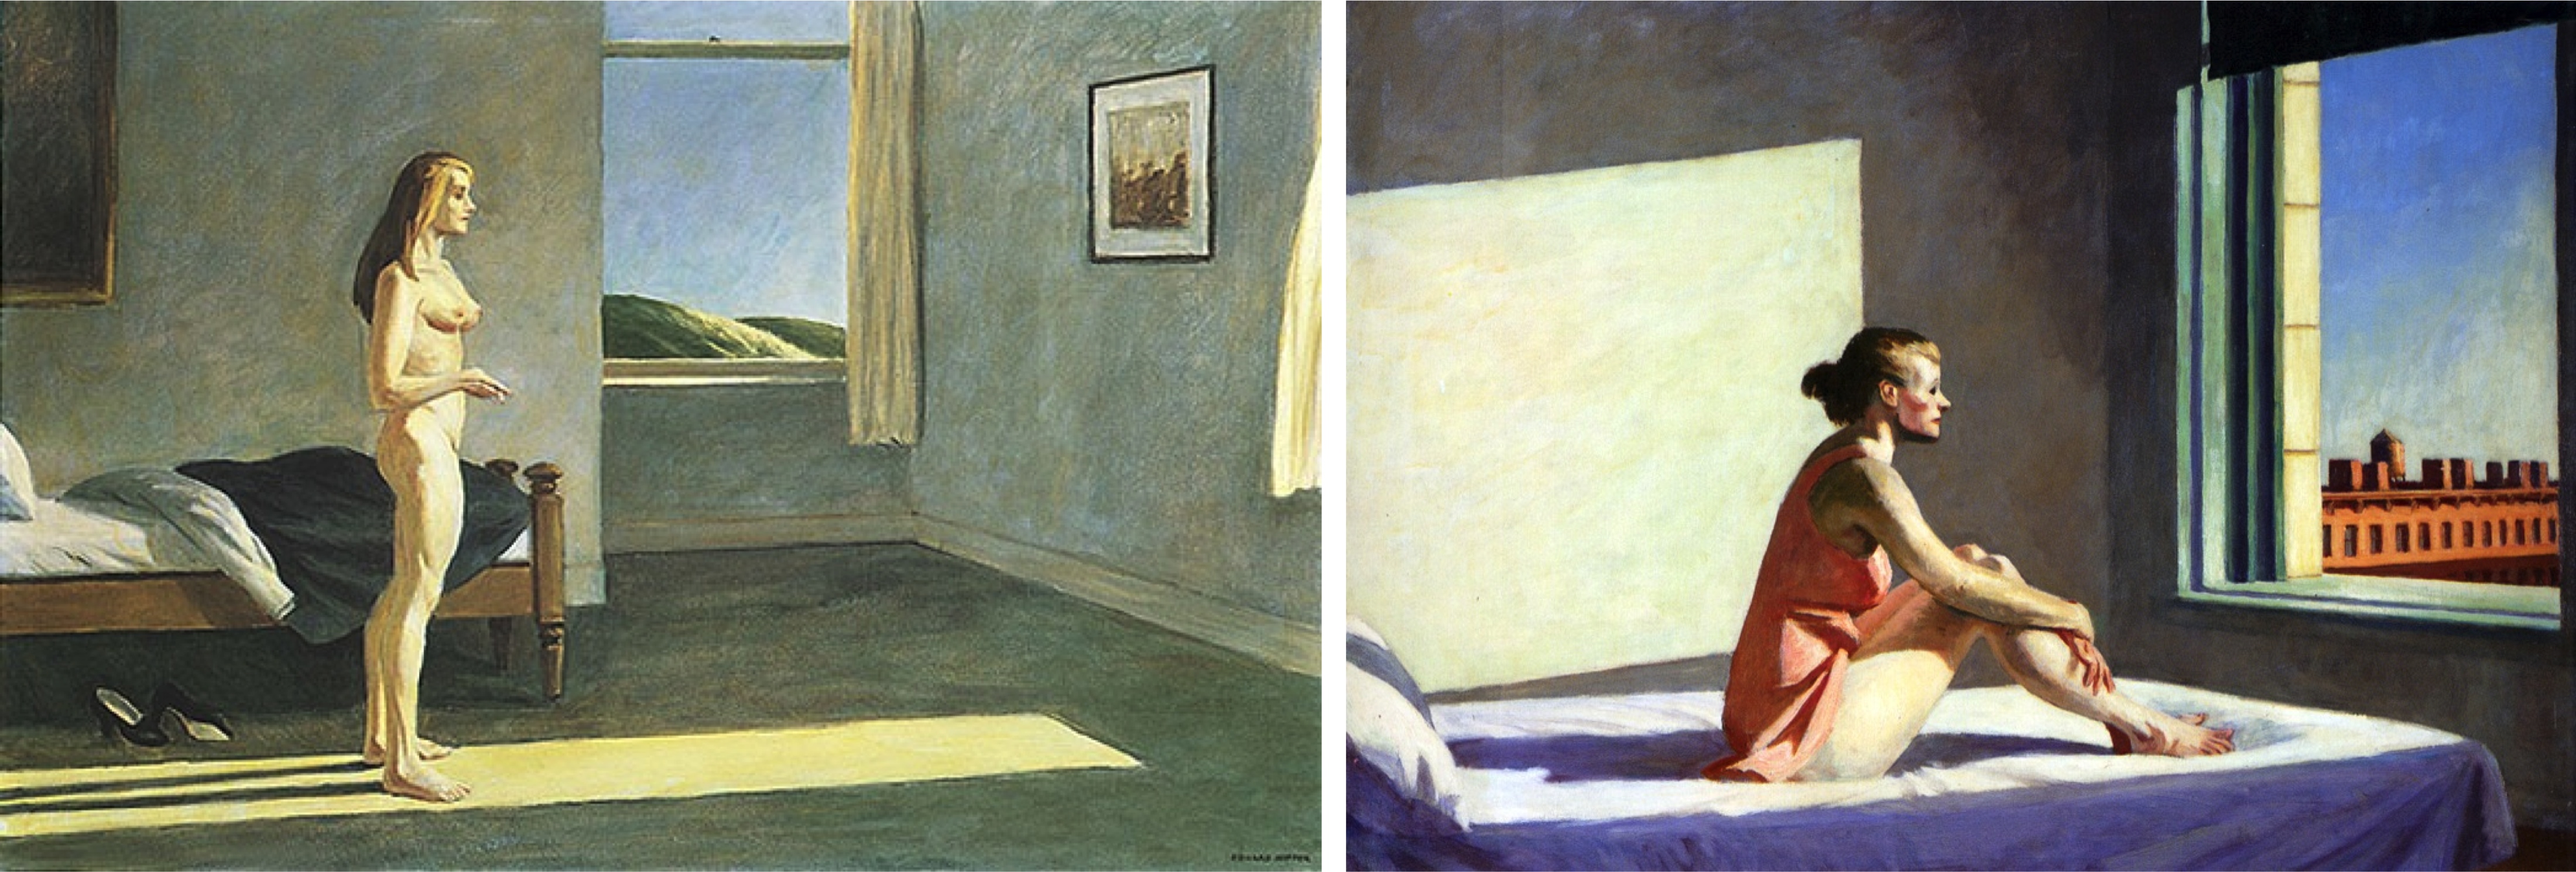 ideal forms and Edward Hopper – Tim Haslett's Blog